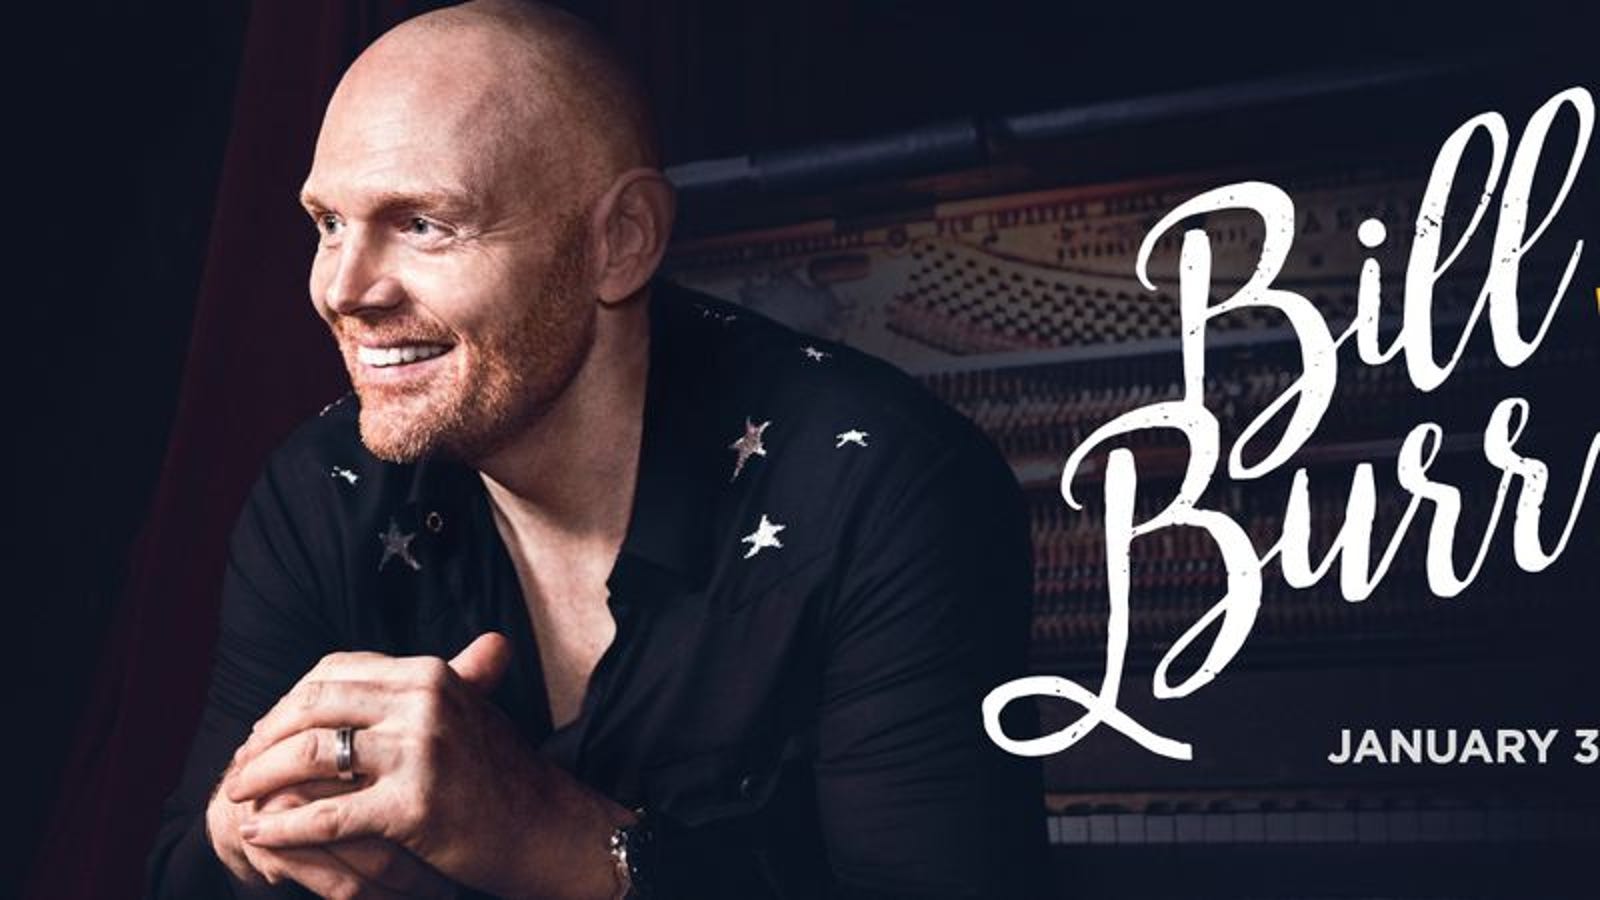 Bill Burr asks you to “Walk Your Way Out” in an exclusive trailer for